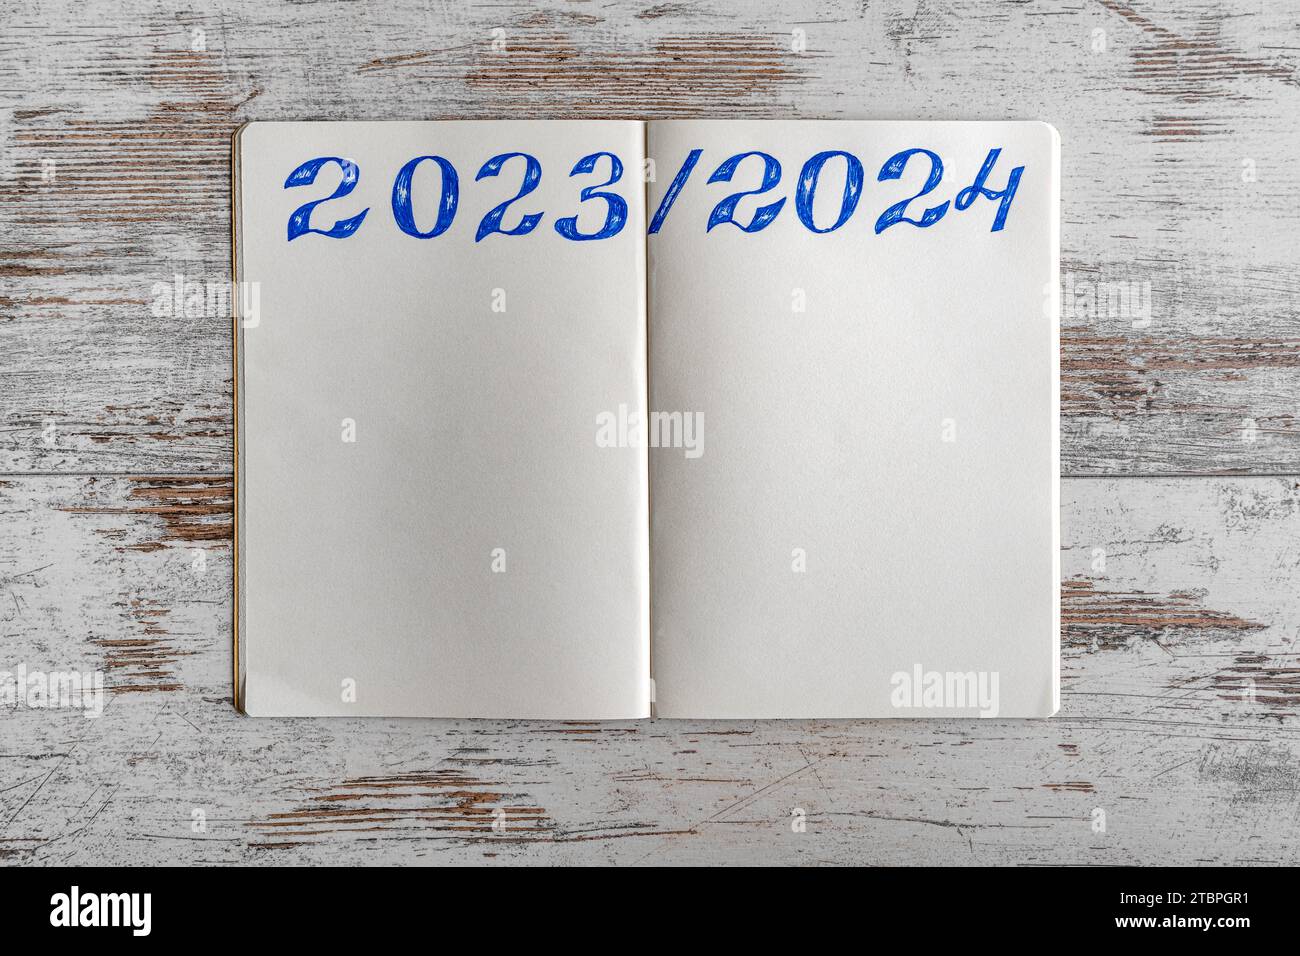 Notepad with dates 2023 and 2024. Stock Photo